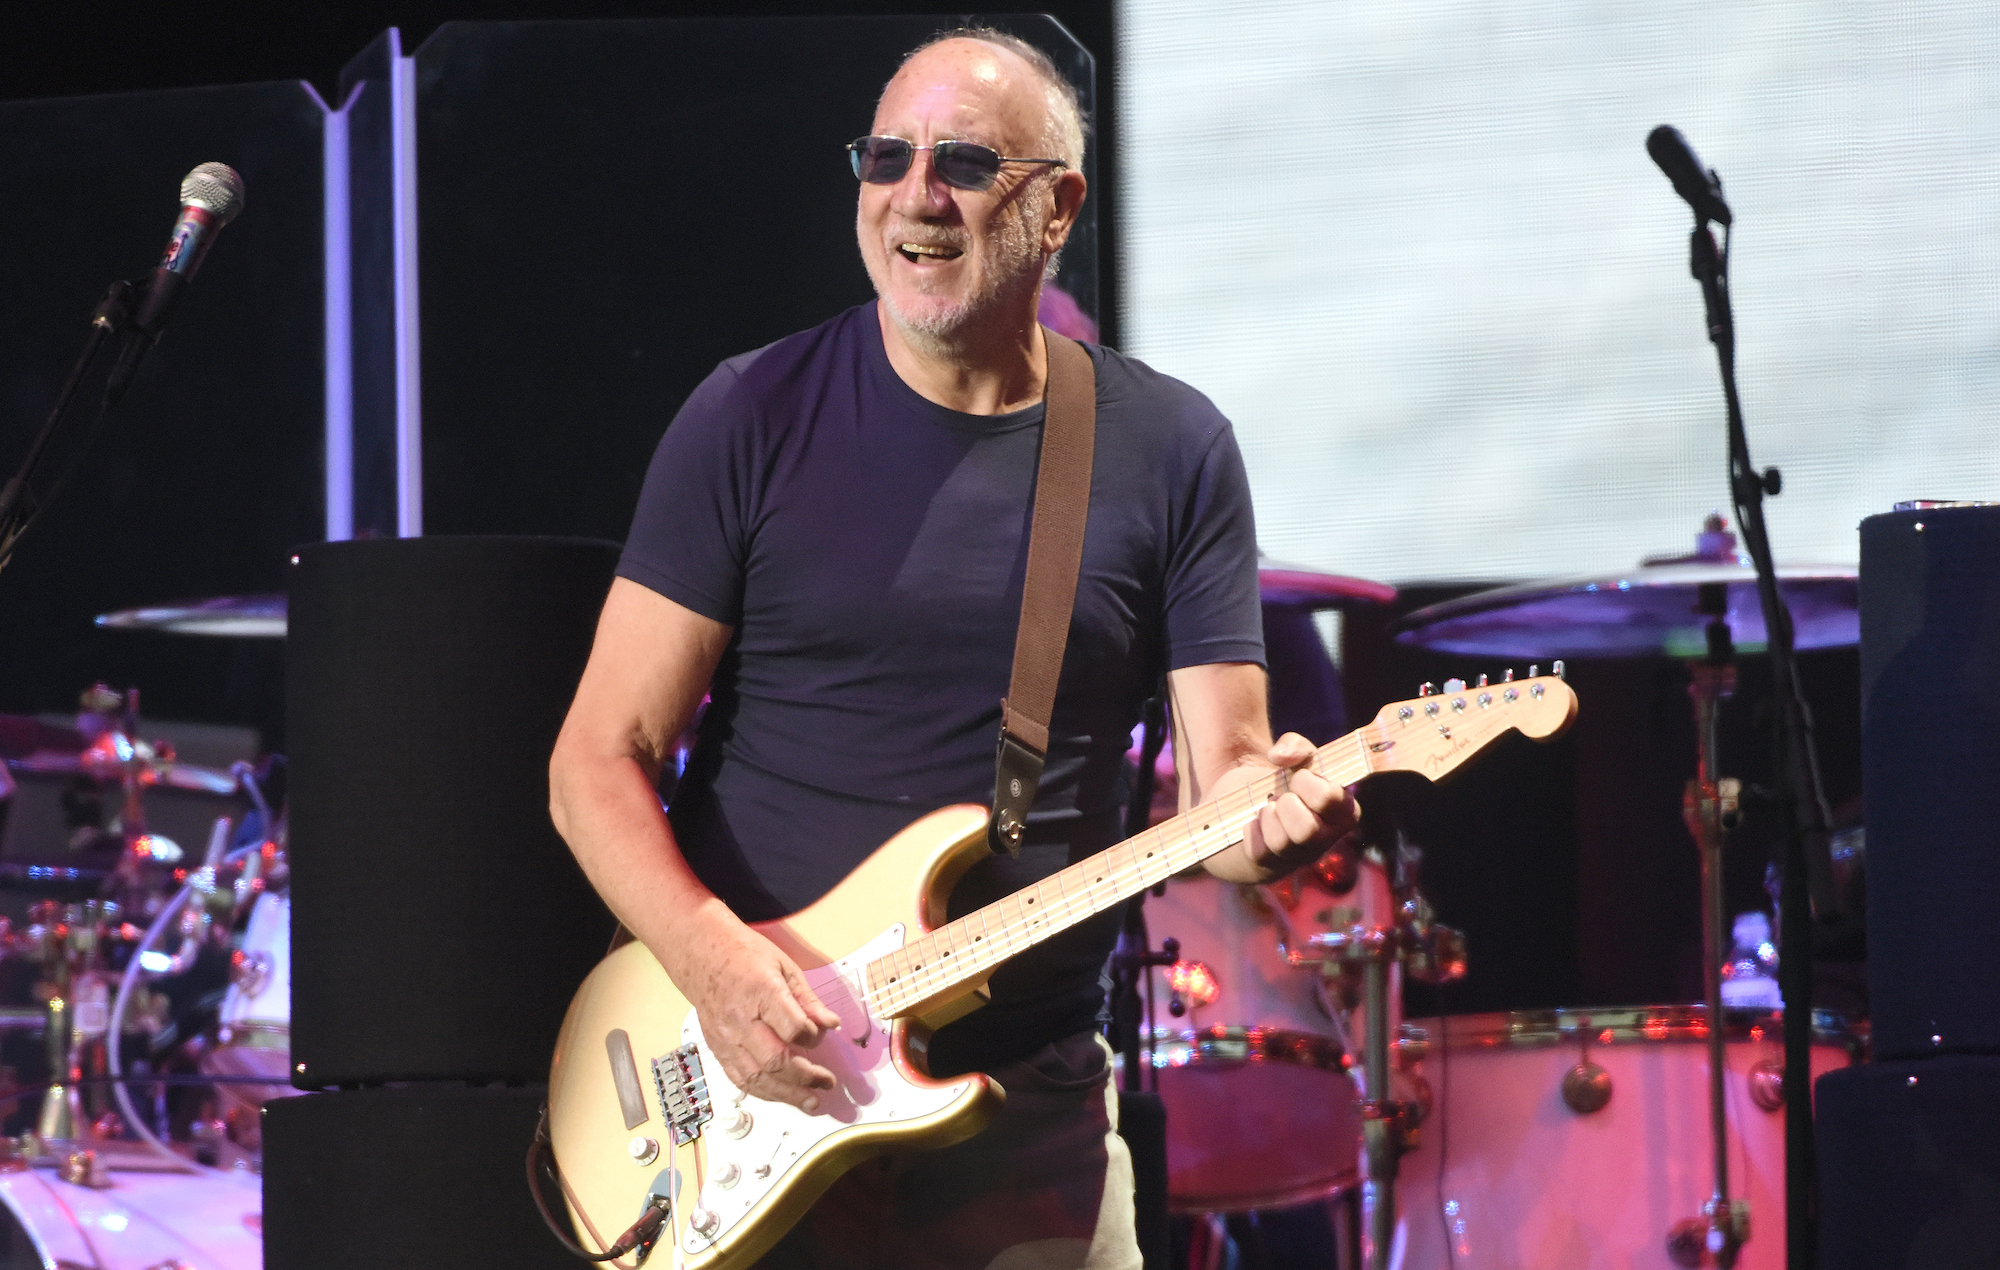 Pete Townshend says his affectionate relationship with Roger Daltrey keeps The Who together